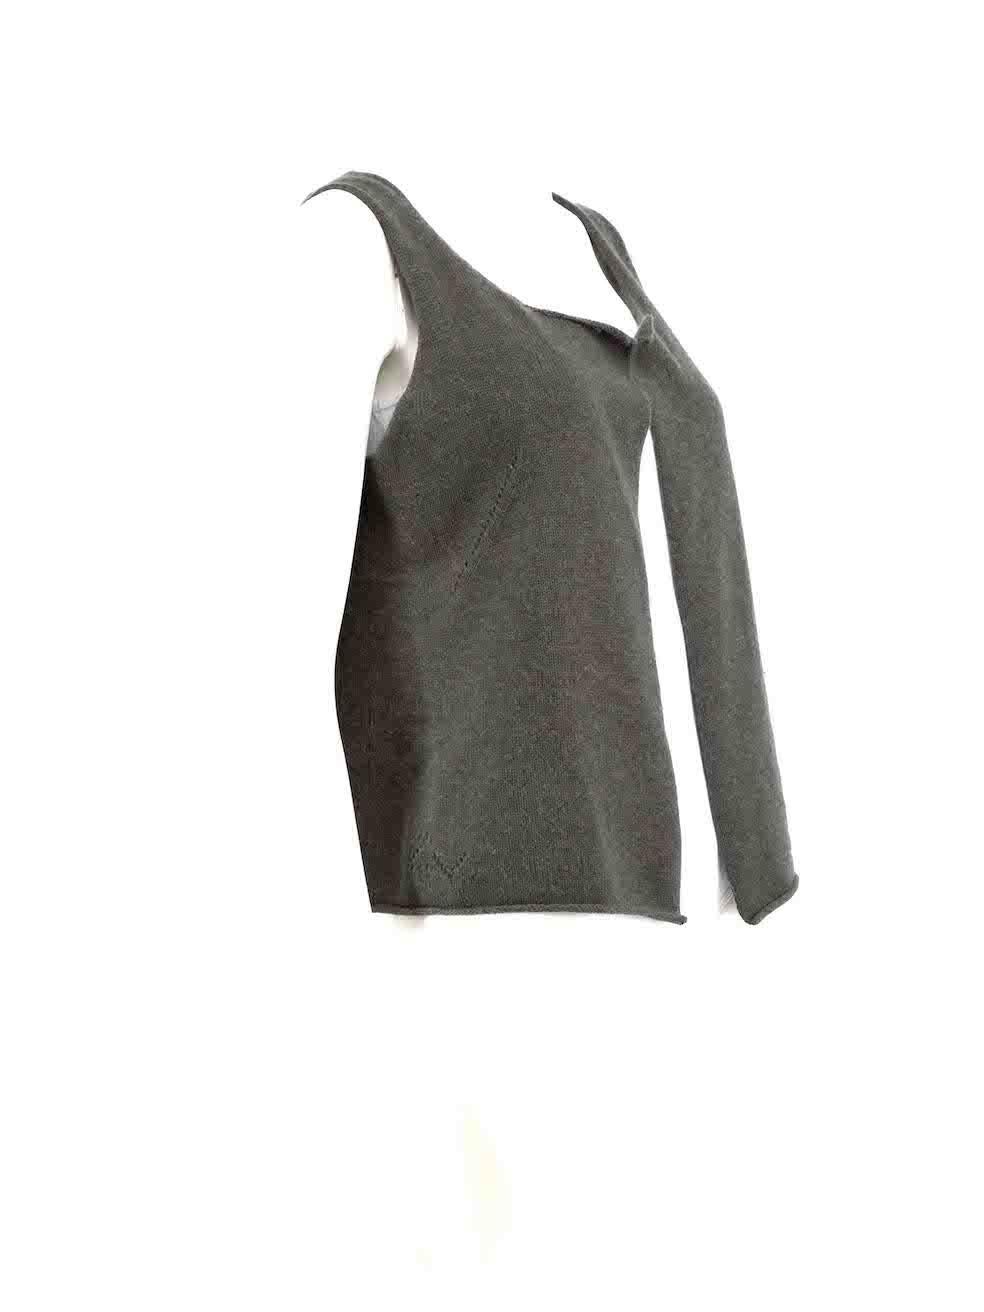 CONDITION is Very good. Minimal wear to knitwear is evident. Minimal wear to brand label at back of neck which has come partially unstitched on this used Zadig & Voltaire designer resale item.
 
 Details
 Khaki
 Cashmere
 Cardigan
 Sleeveless
